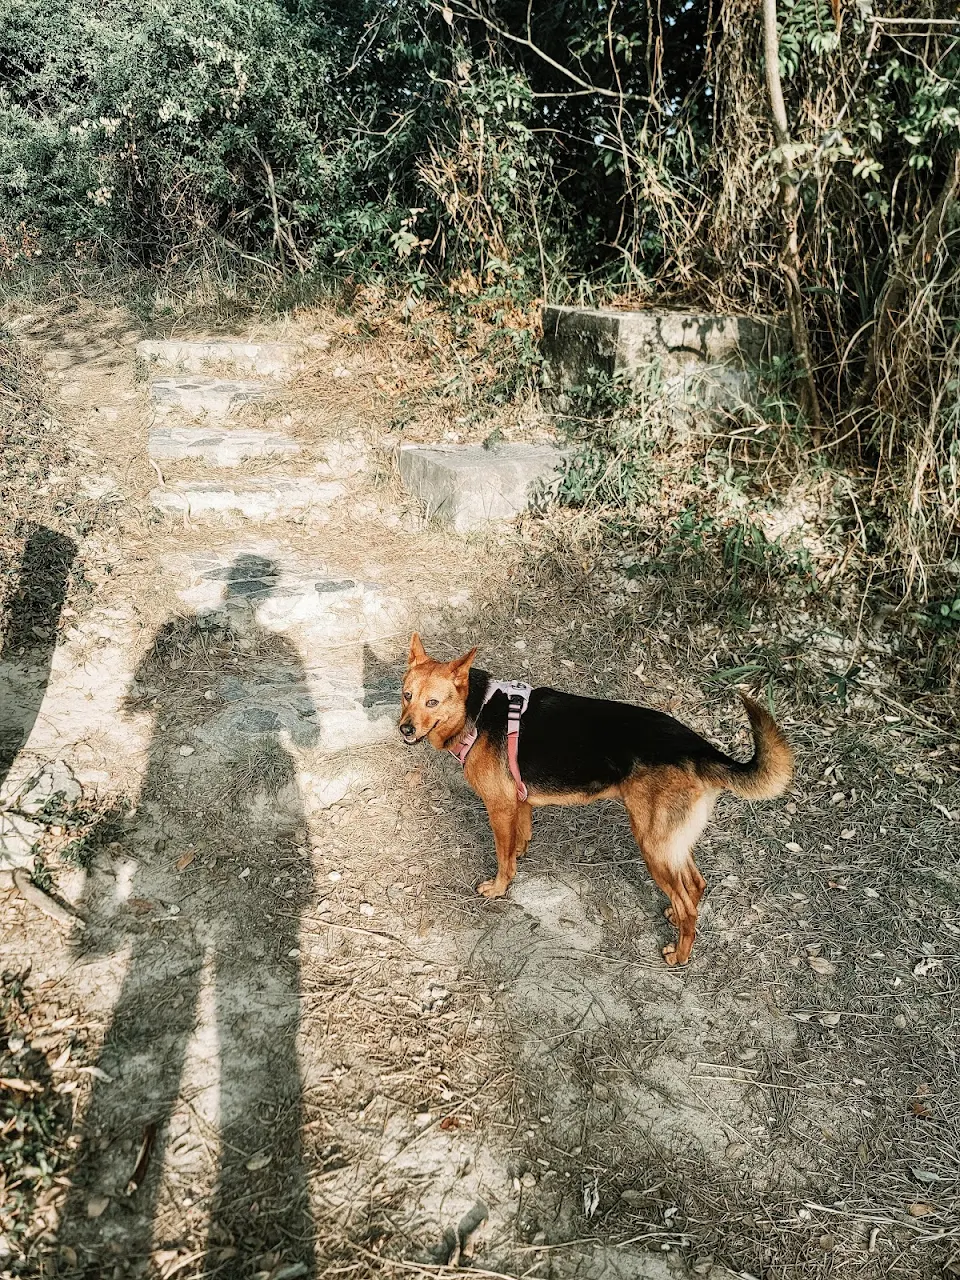 Leia at her happiest, navigating the hiking trails of Hong Kong